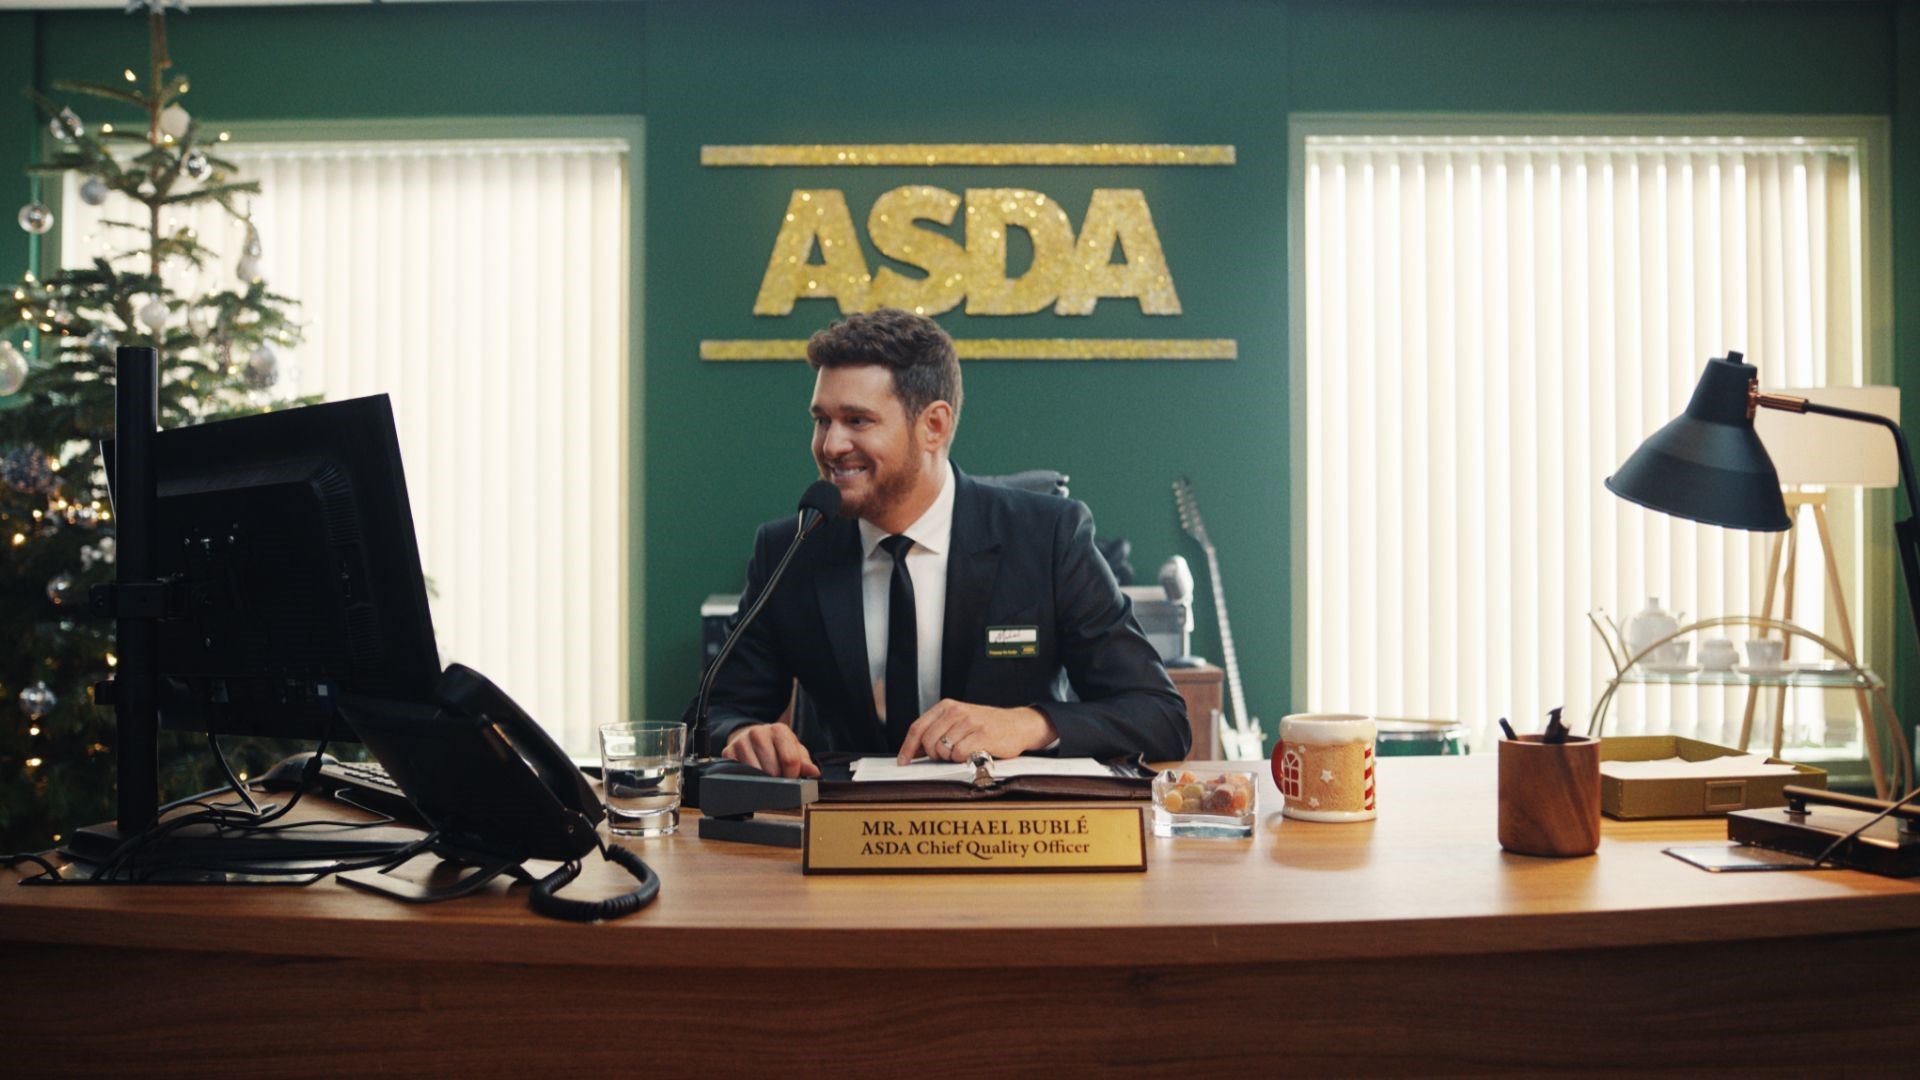 Asda’s 2023 Christmas advert stars Michael Buble, in the role as chief quality officer (Asda/PA)